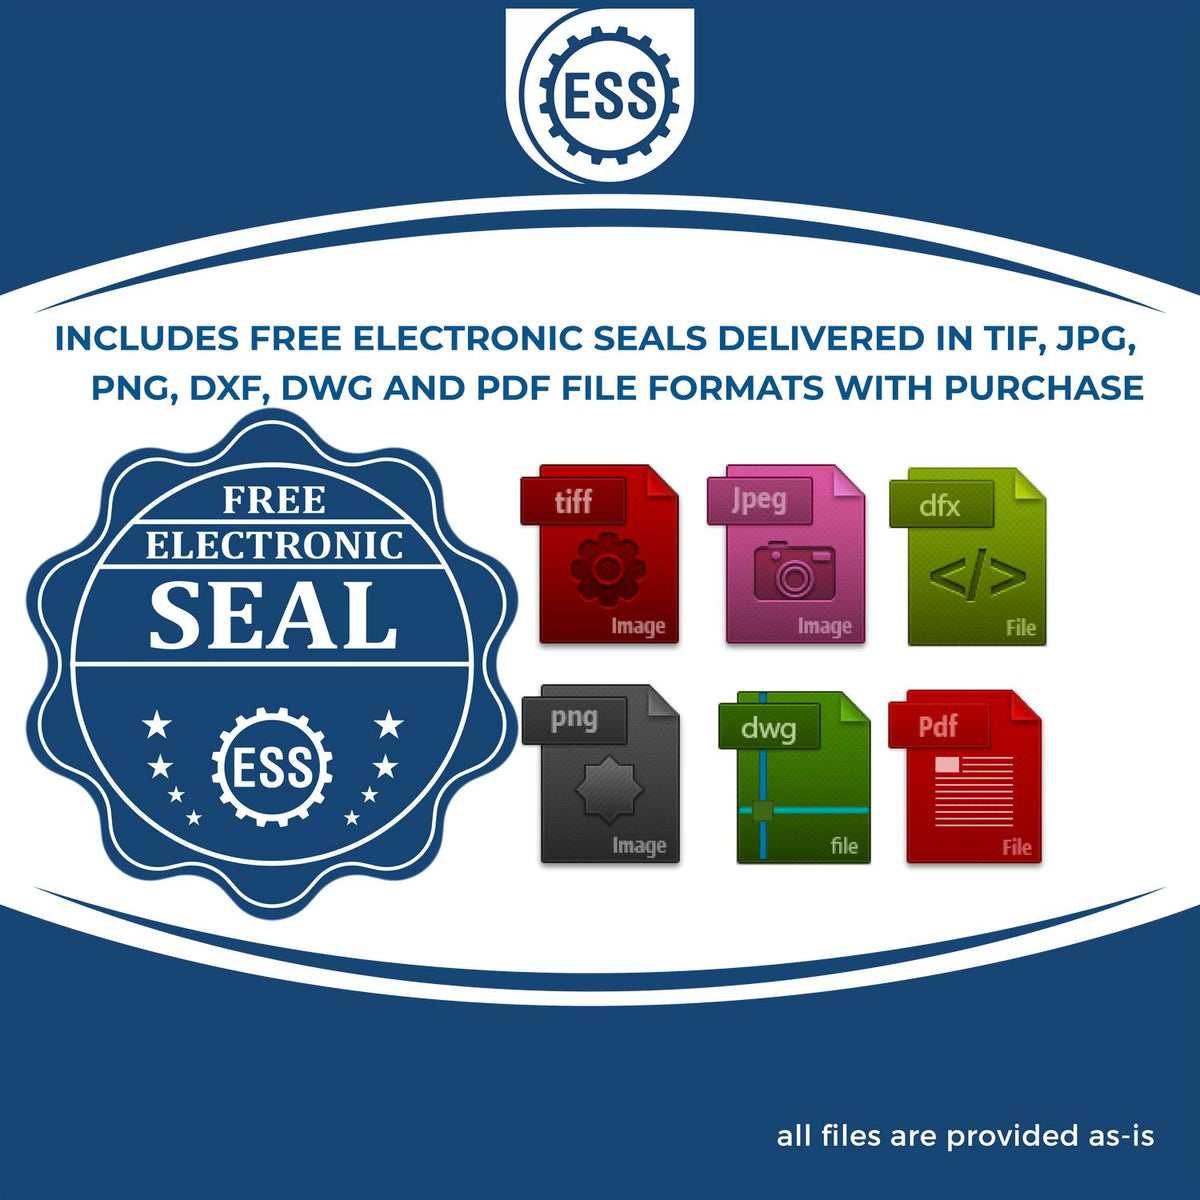 An infographic for the free electronic seal for the Slim Pre-Inked State Seal Notary Stamp for California illustrating the different file type icons such as DXF, DWG, TIF, JPG and PNG.